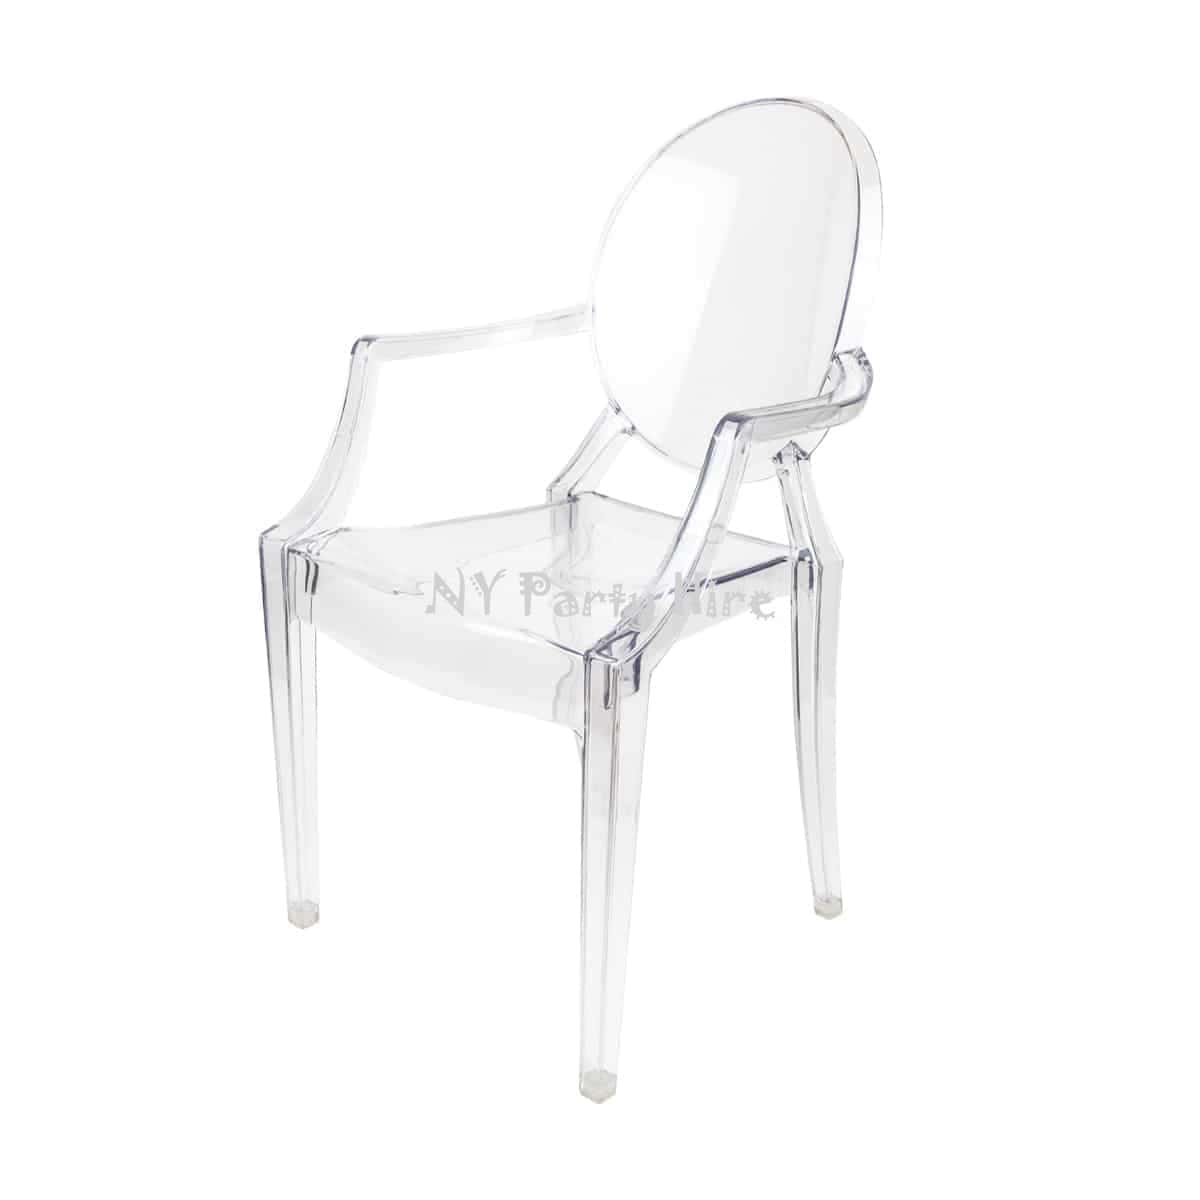 Ghost Chair, Kids Chair hire, Kids Party Chairs, Kids Ghost Chair